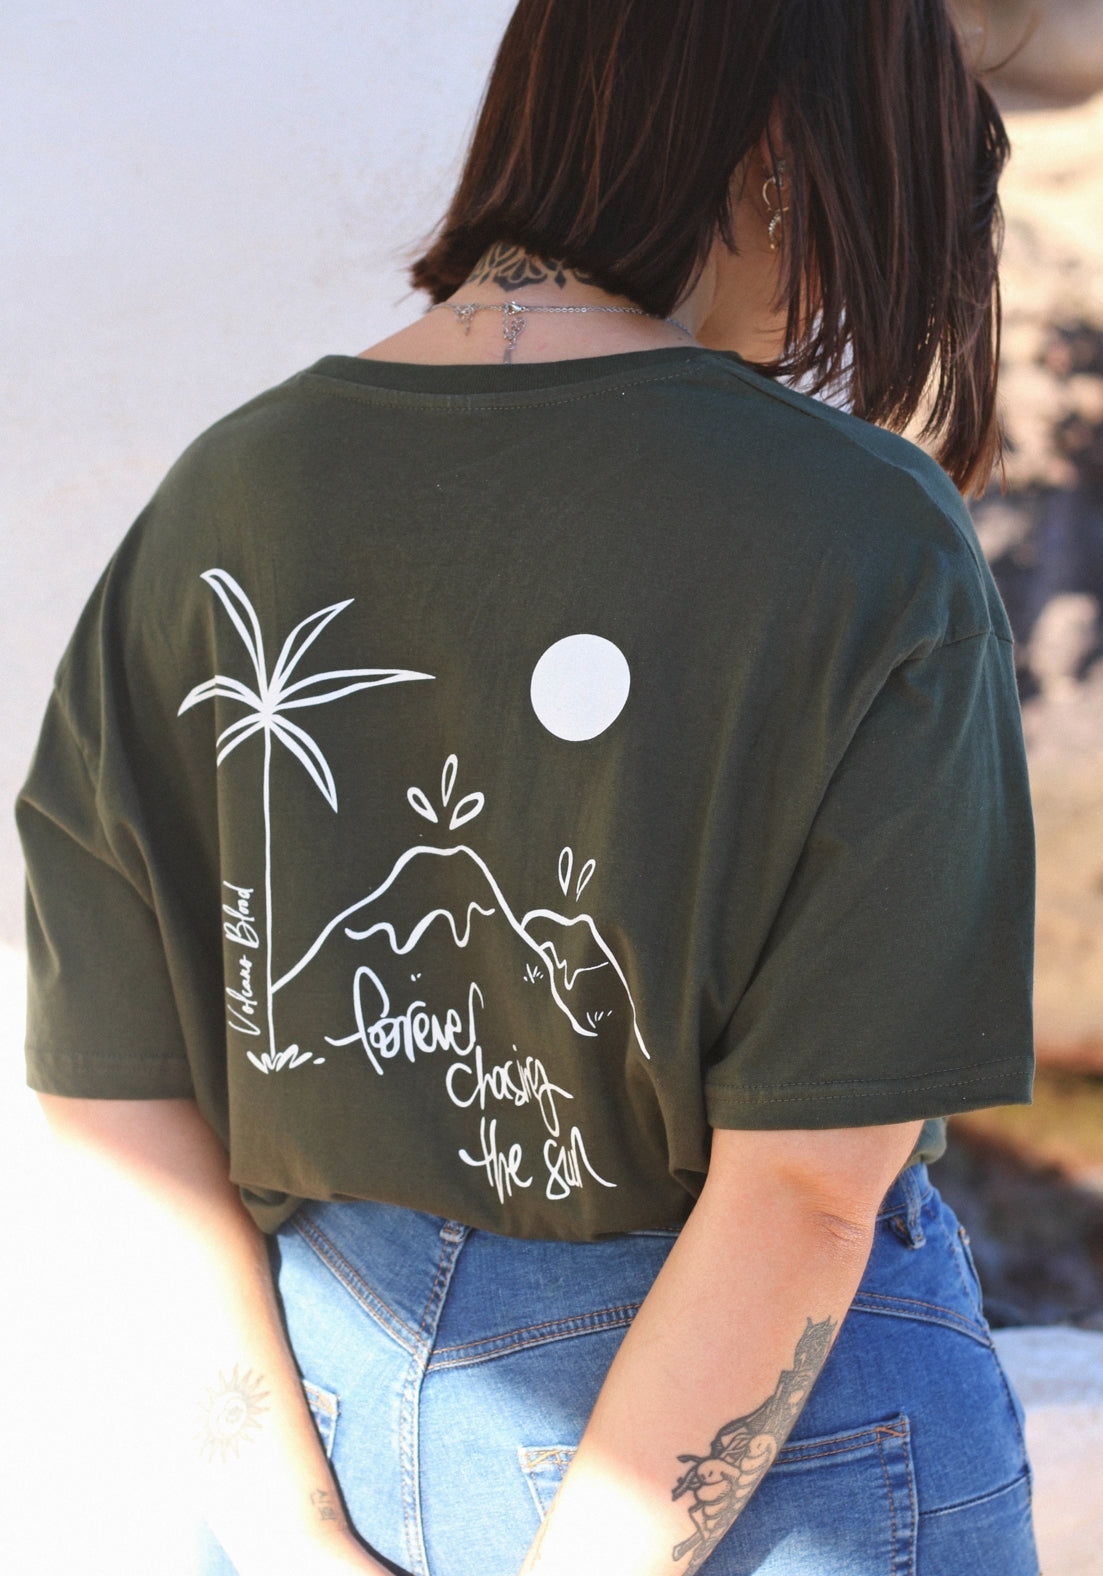 "FOREVER CHASING THE SUN" T-SHIRT